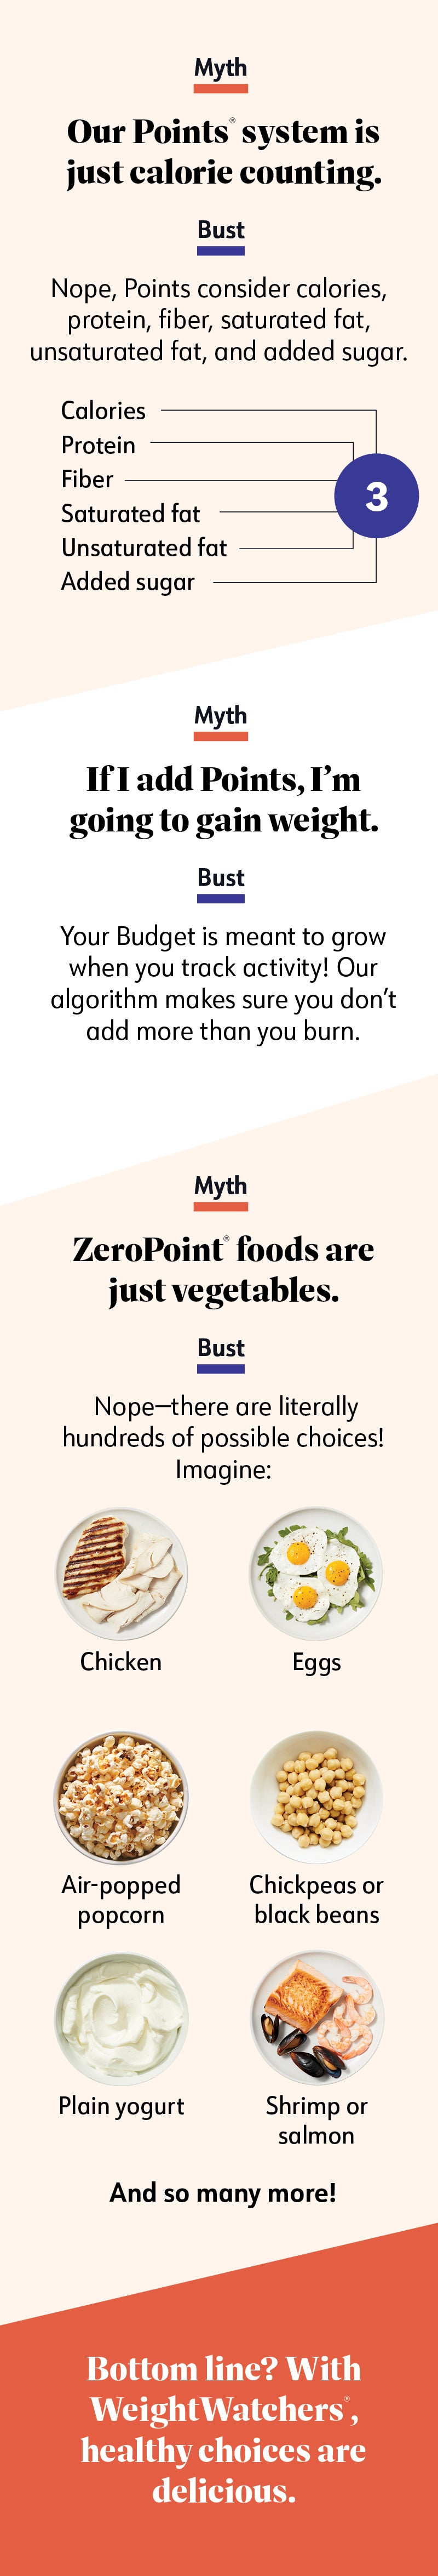 Myth 1/Points system is just calorie counting. Myth 2/Adding Points to Budget means gaining weight. Myth 3/ZeroPoint foods are only veggies